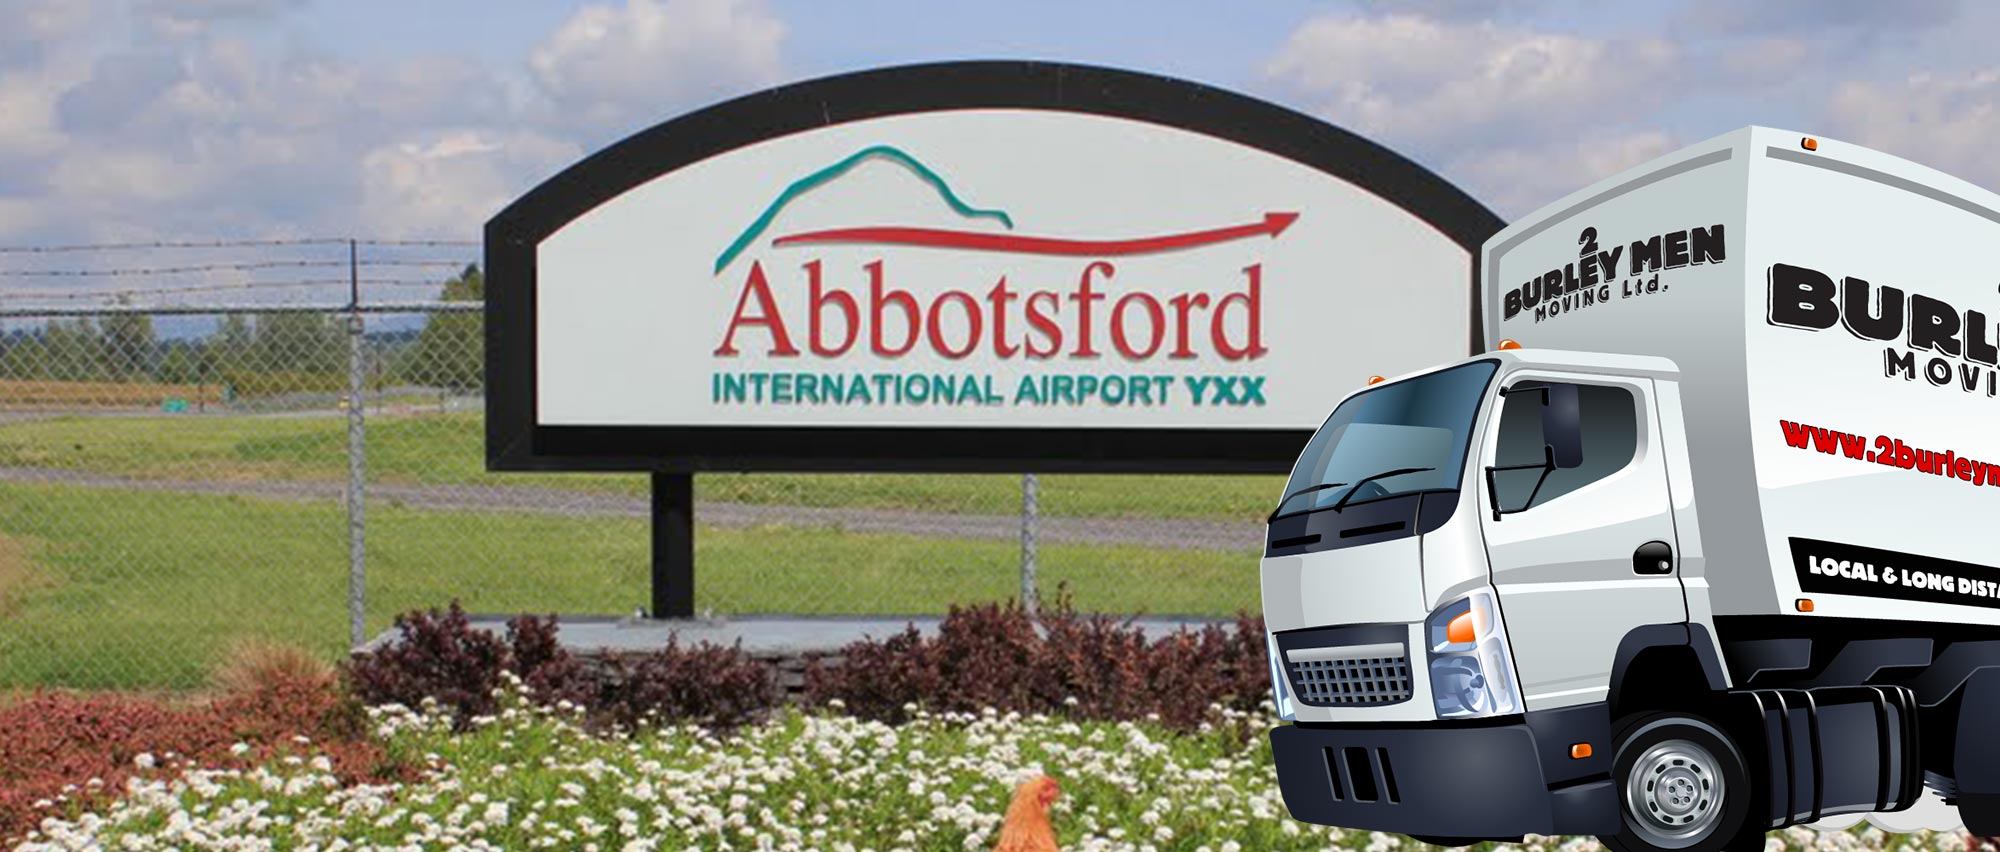 abbotsford movers